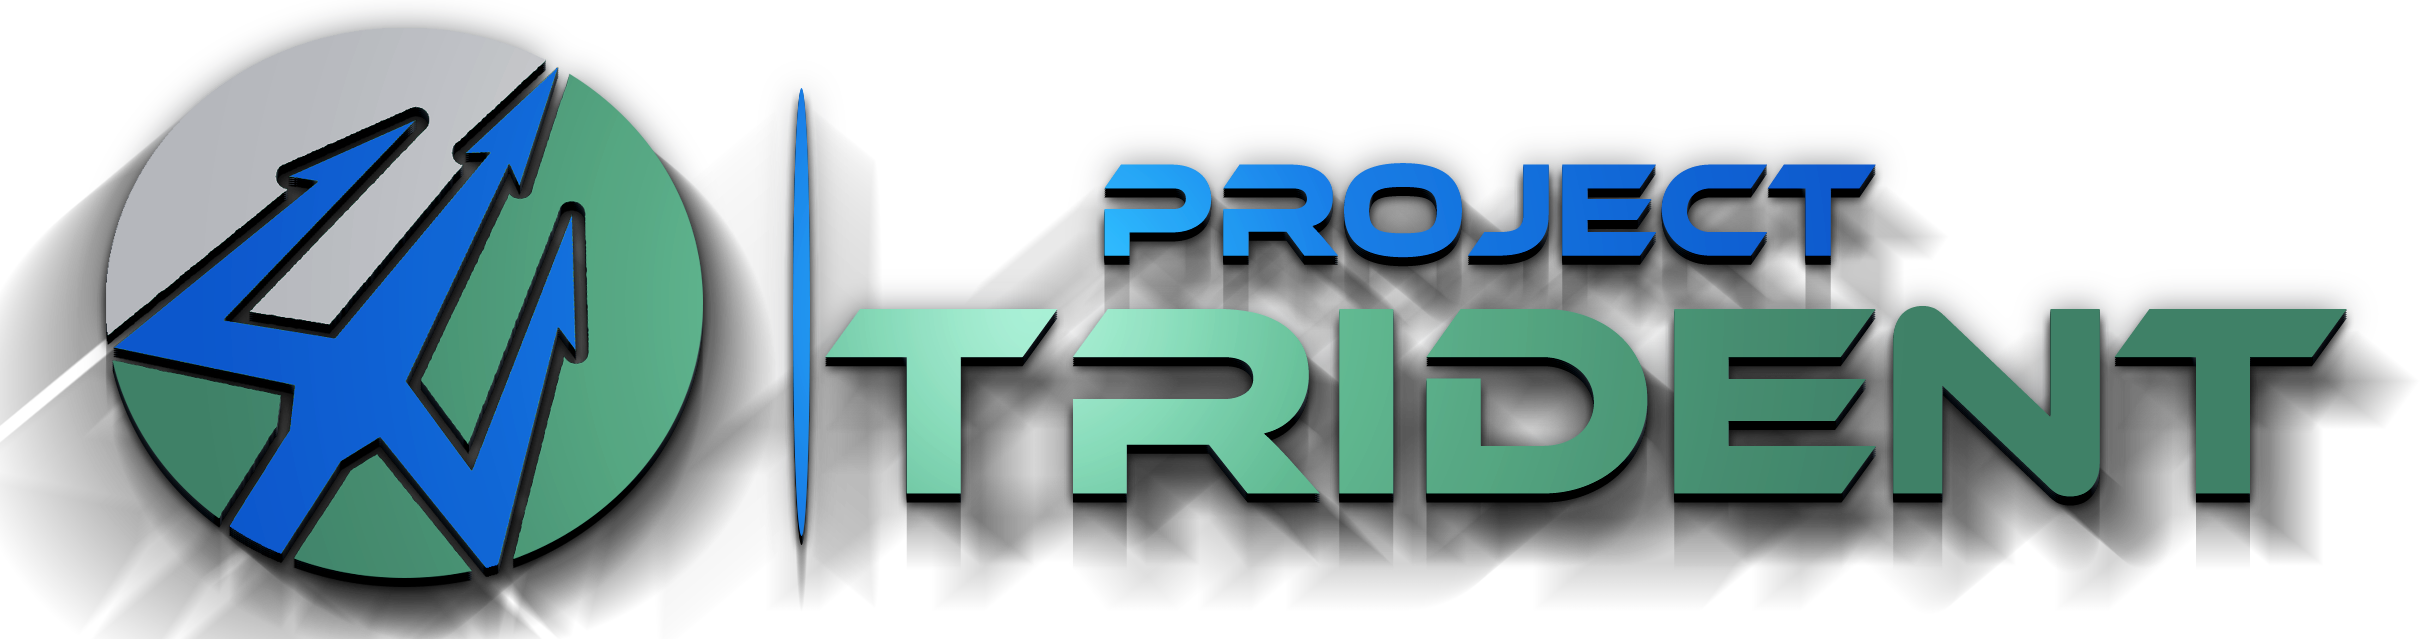 Project-Trident Banner